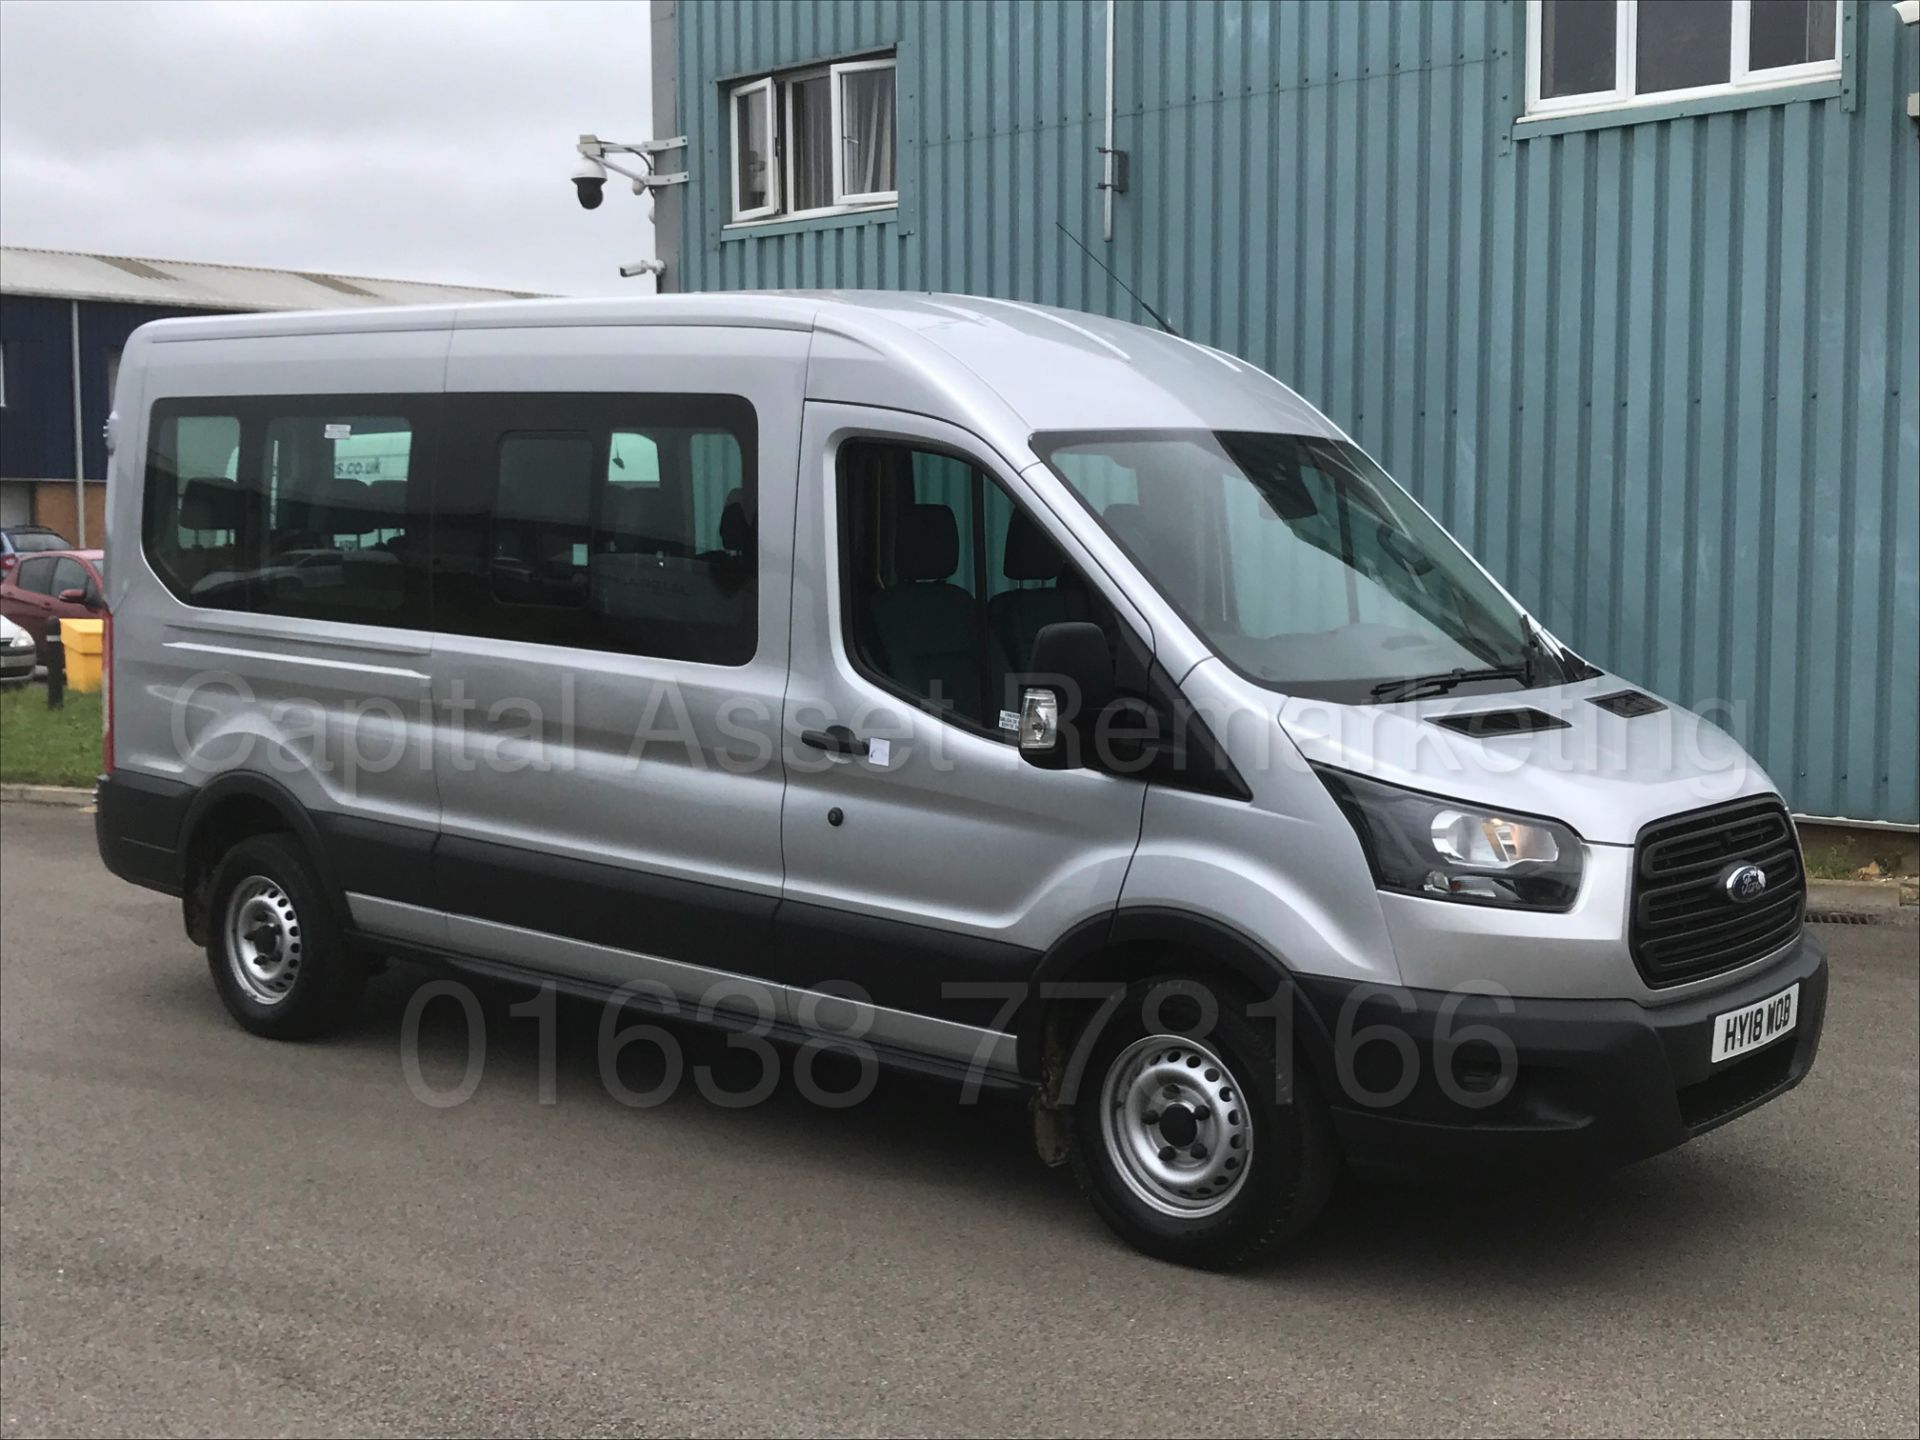 (On Sale) FORD TRANSIT LWB '15 SEATER MINI-BUS' (2018) '2.2 TDCI -125 BHP- 6 SPEED' 130 MILES ONLY ! - Image 18 of 50